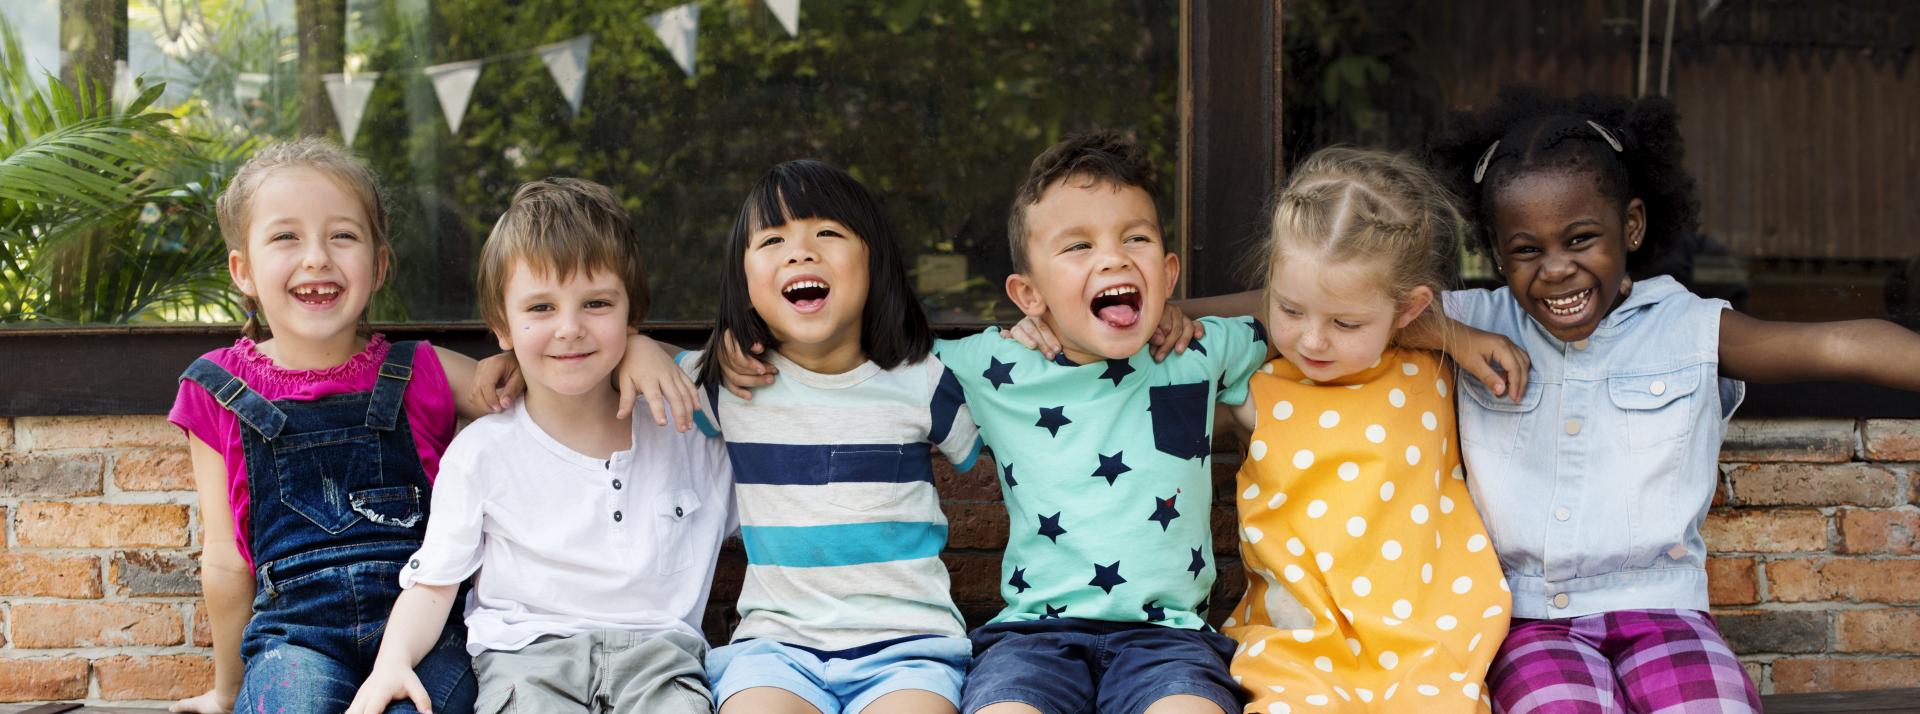 A group photo of six children laughing outside.